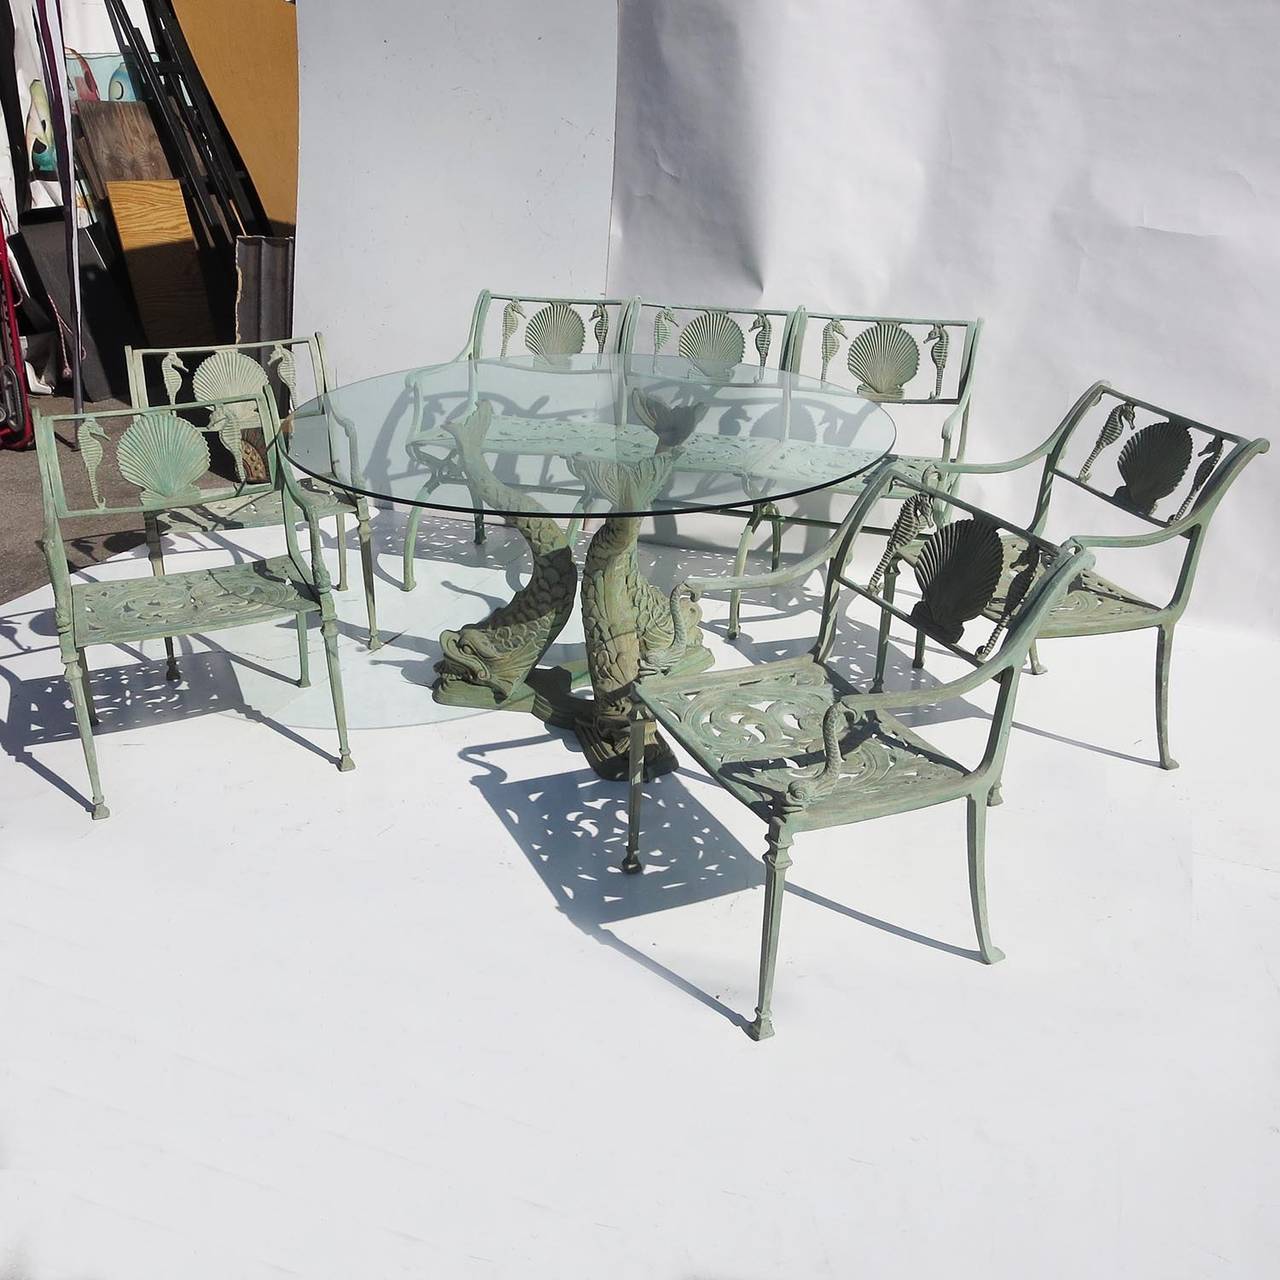 The ultimate patio setting for a balmy evening in the Hamptons! Created by the Molla Furniture Company in New York City in the 1940s. Cast aluminum was utilized to prevent any deterioration of rust, and the furniture was painted in a sage green